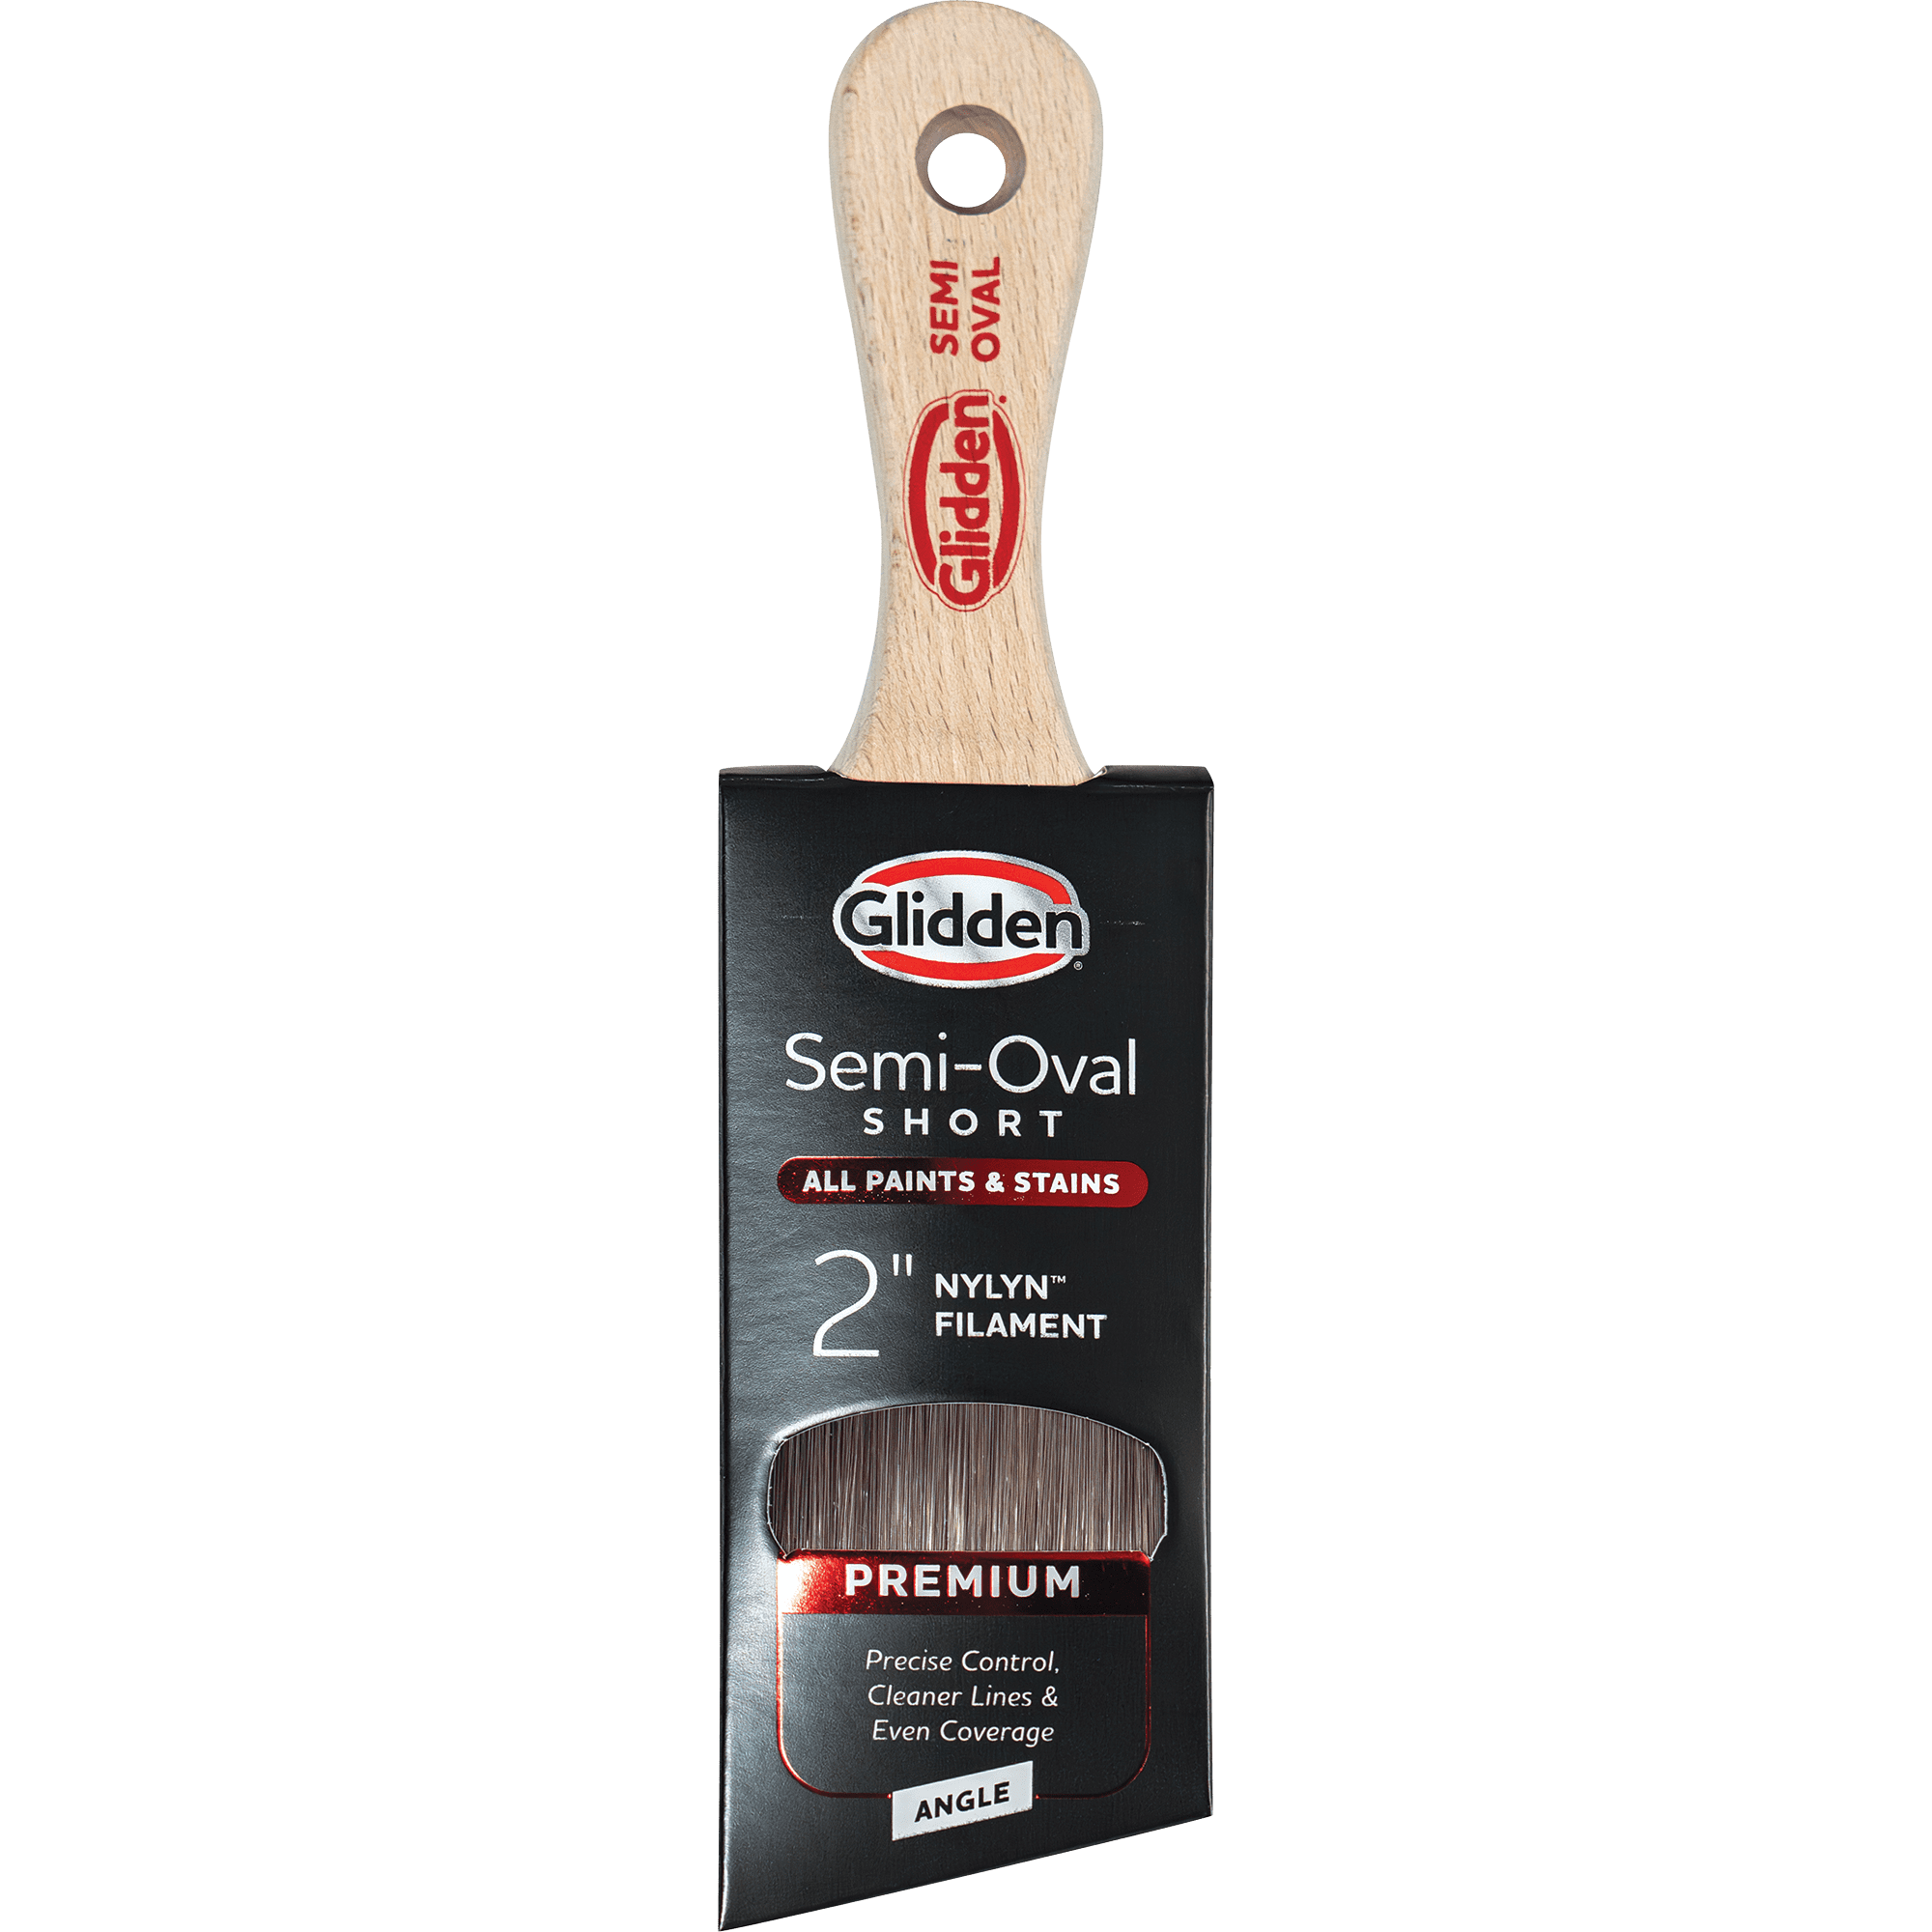 Wooster 5229 Silver Tip Paint Brush Variety 3Pk (Contains 1Ea 1 5224 1Ea  1-1/2 5221 & 1Ea 2 5222)